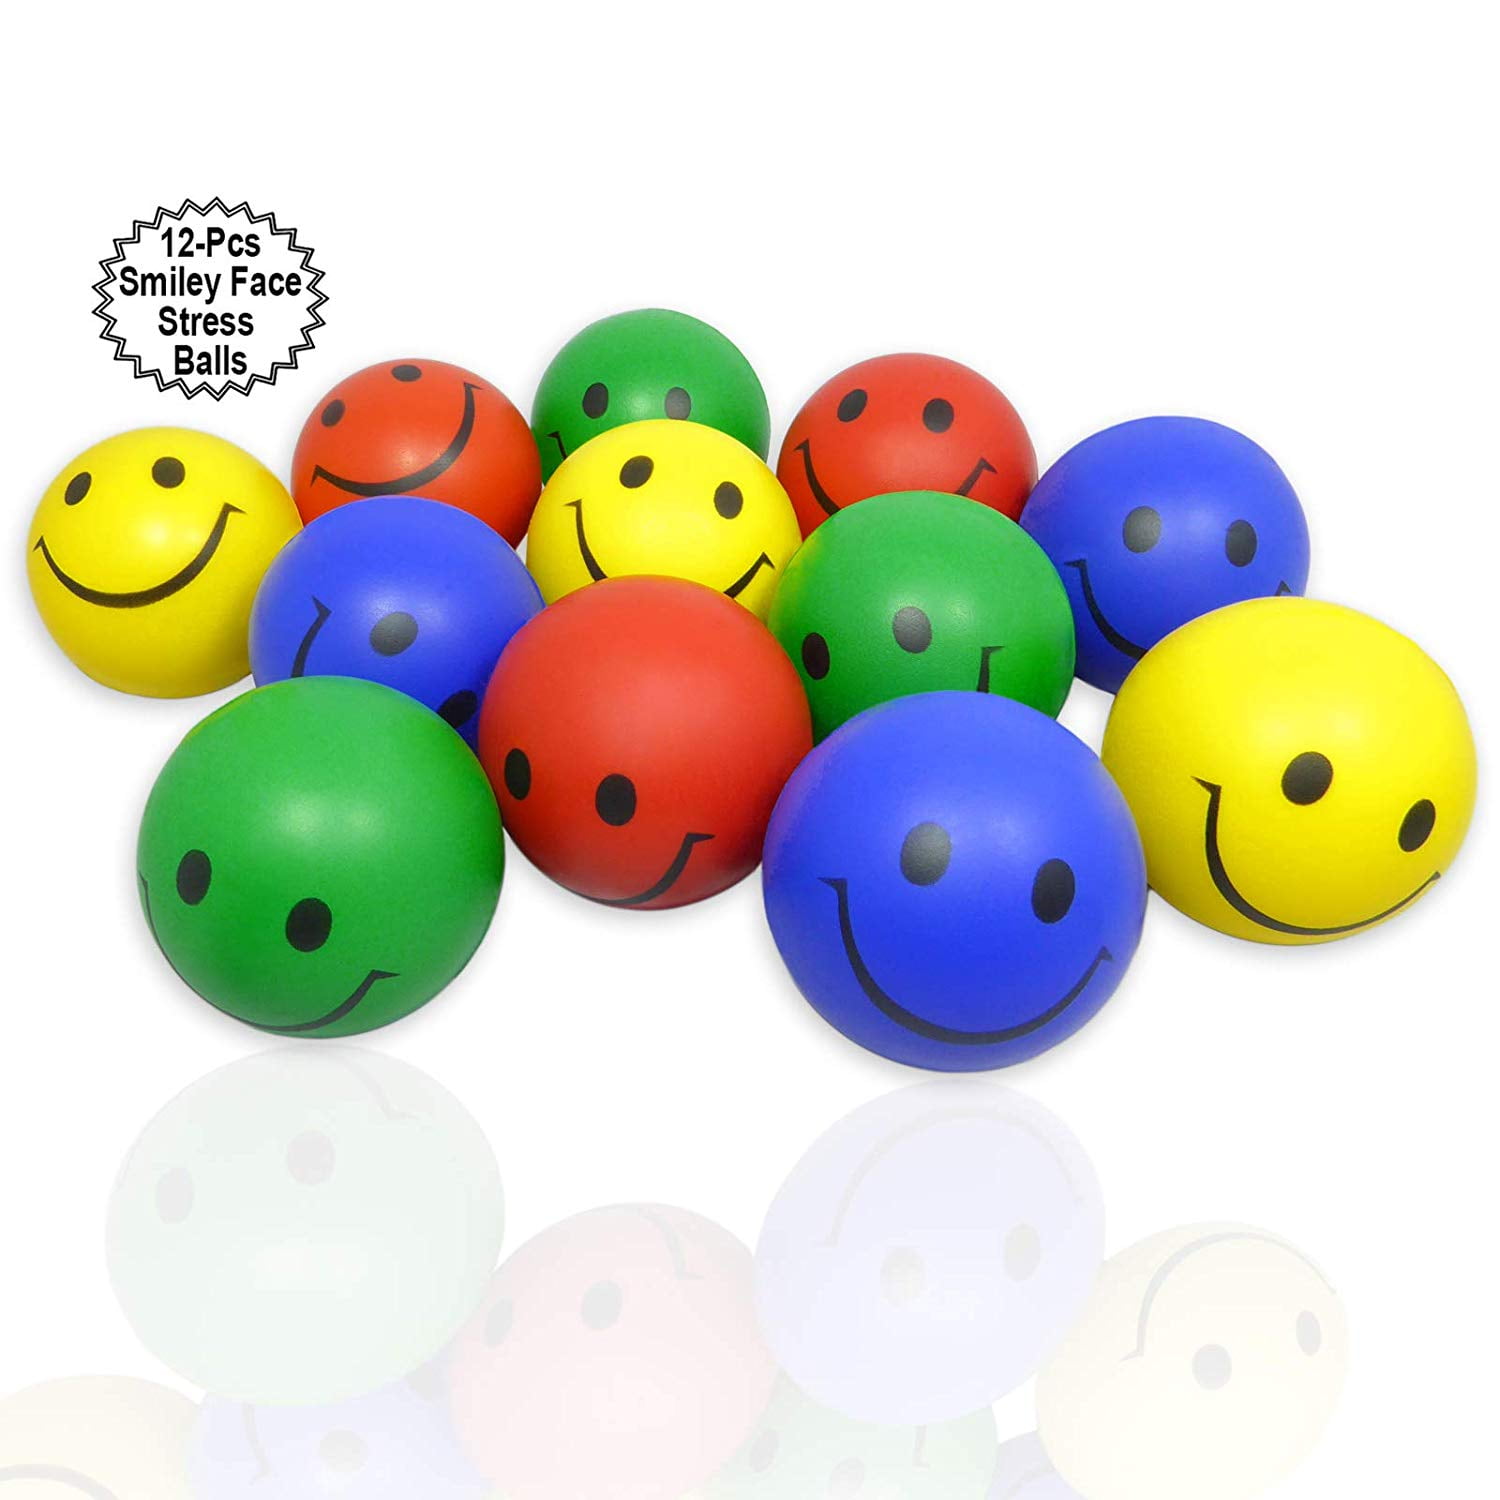 1 SMILE SMILEY FACE STRESS RELIEF BALL 2" FOAM HAND THERAPY SQUEEZE TOY BALLS 